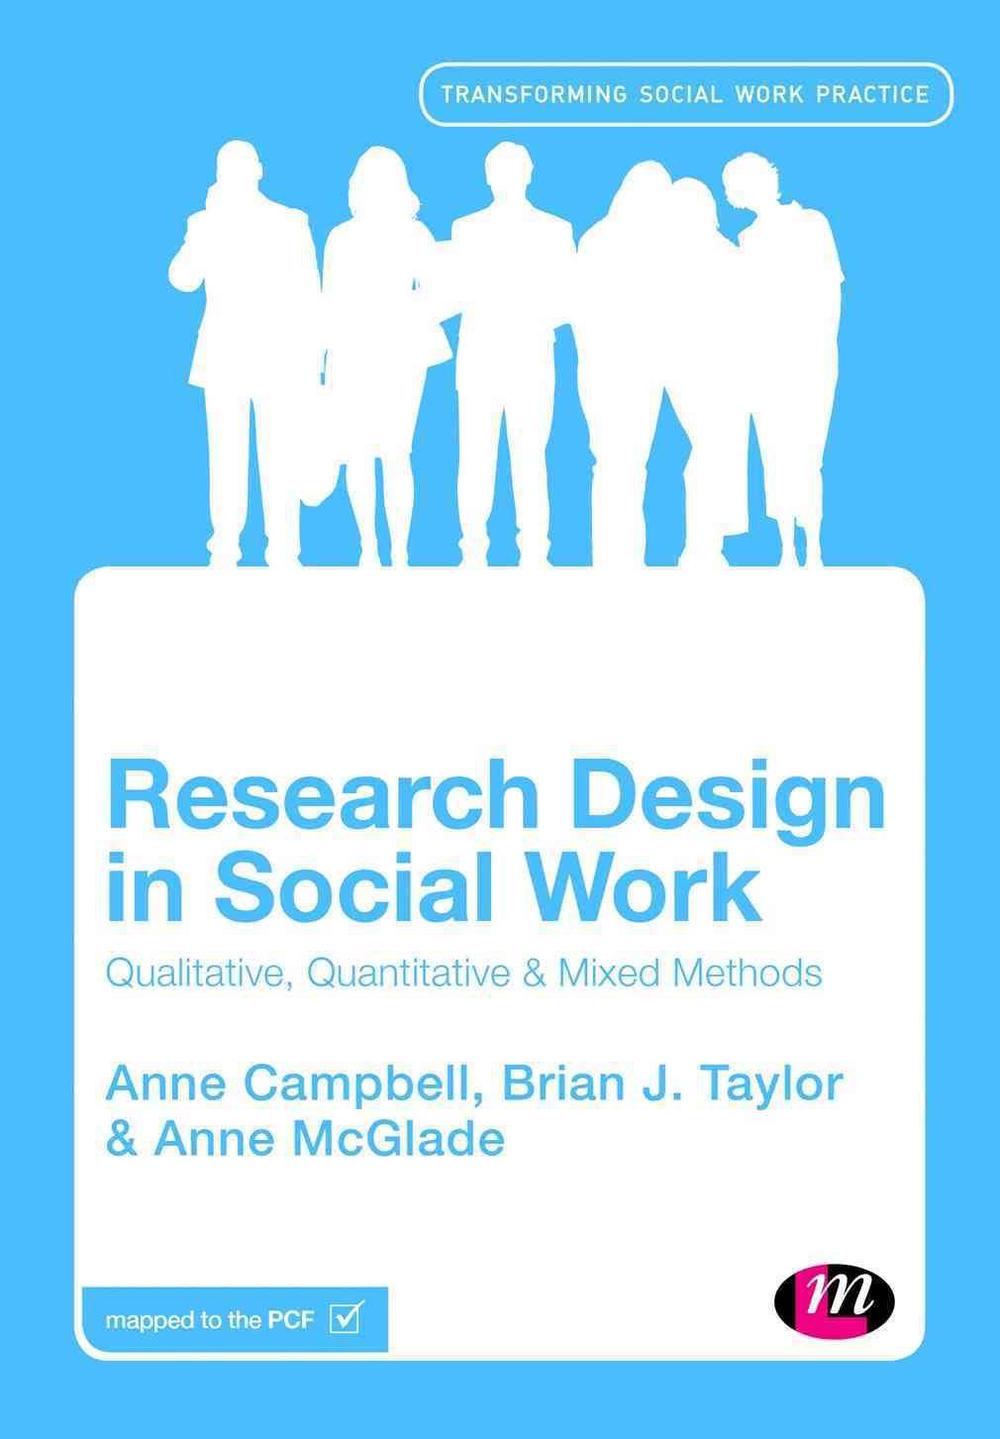 what is research design in social work